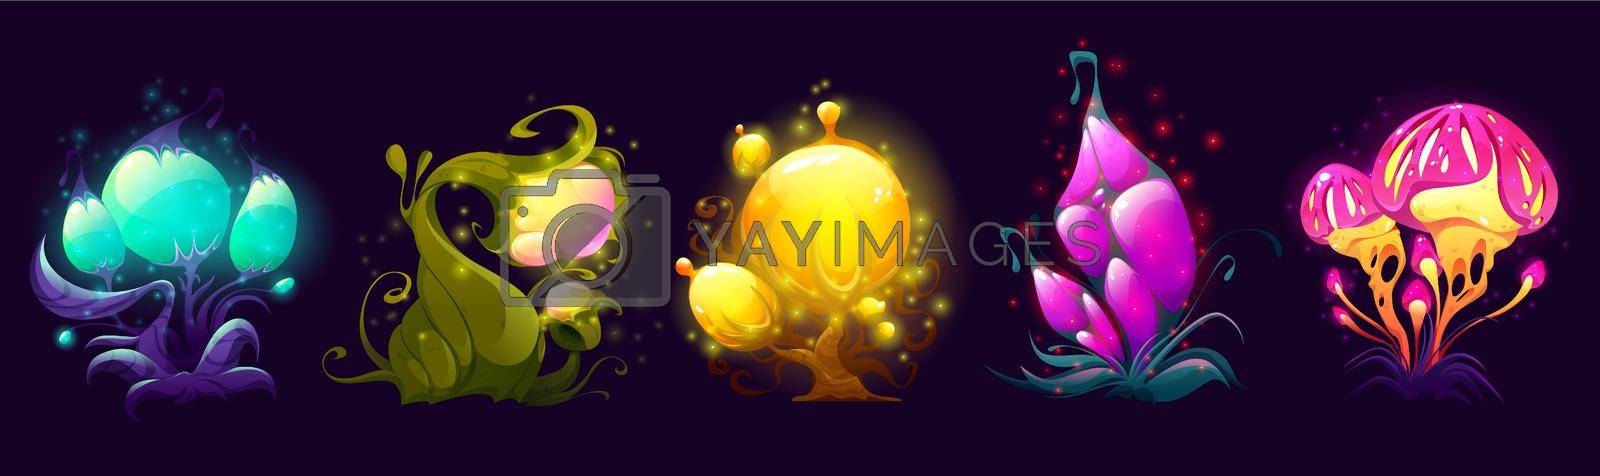 Royalty free image of Fantasy flowers, trees, and mushrooms alien plants by vectorart